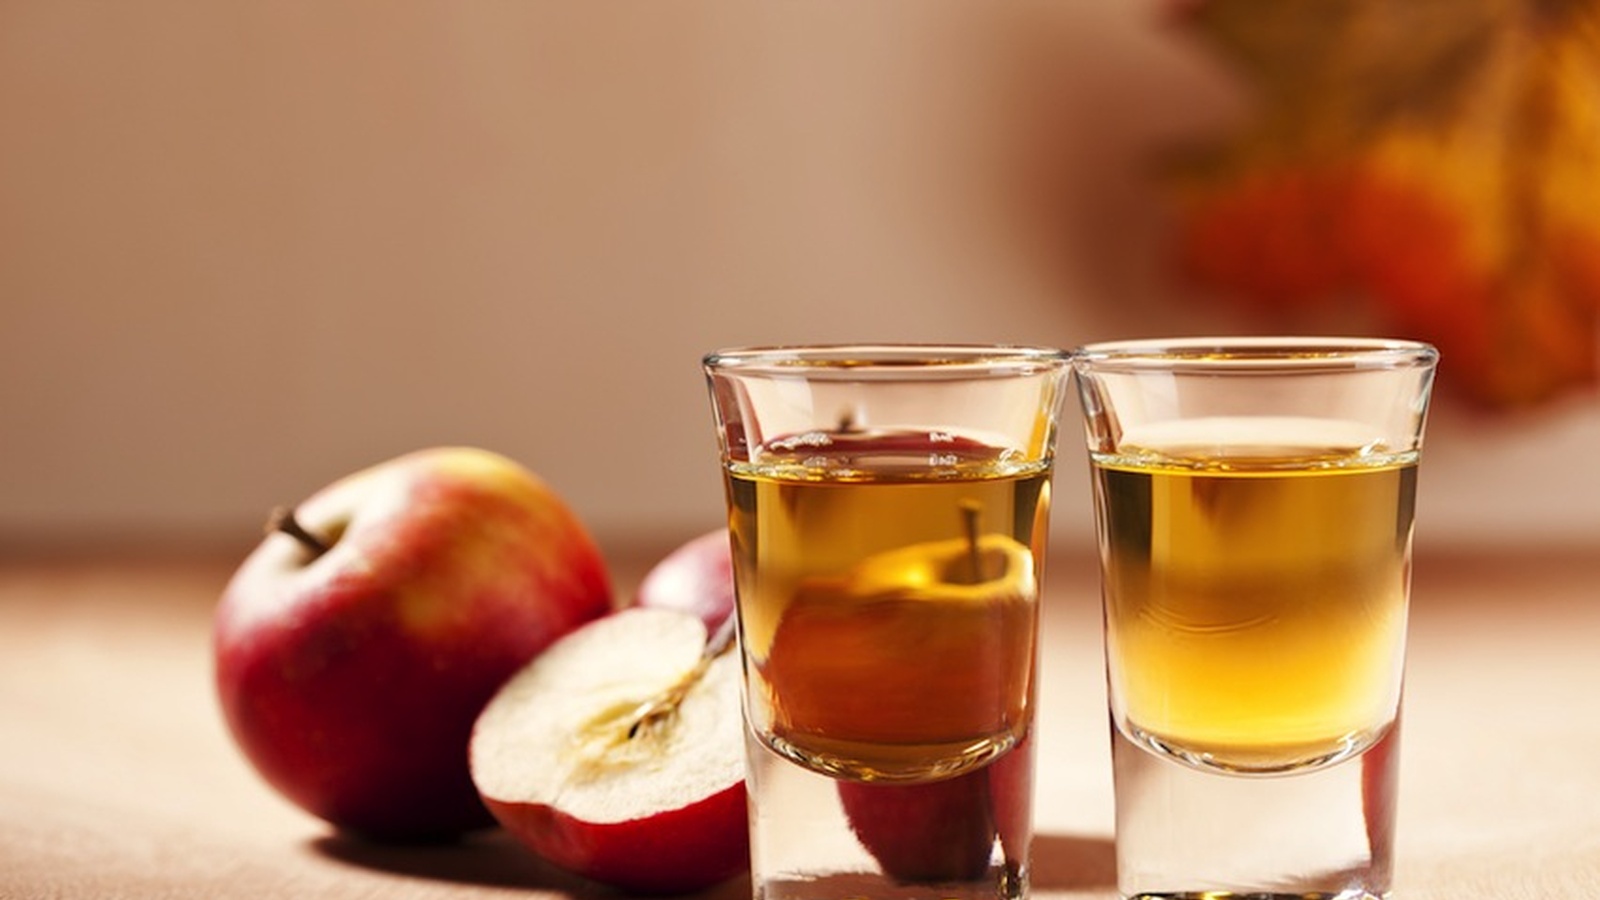 Can Apple Cider Vinegar Cure Your Sugar Cravings?